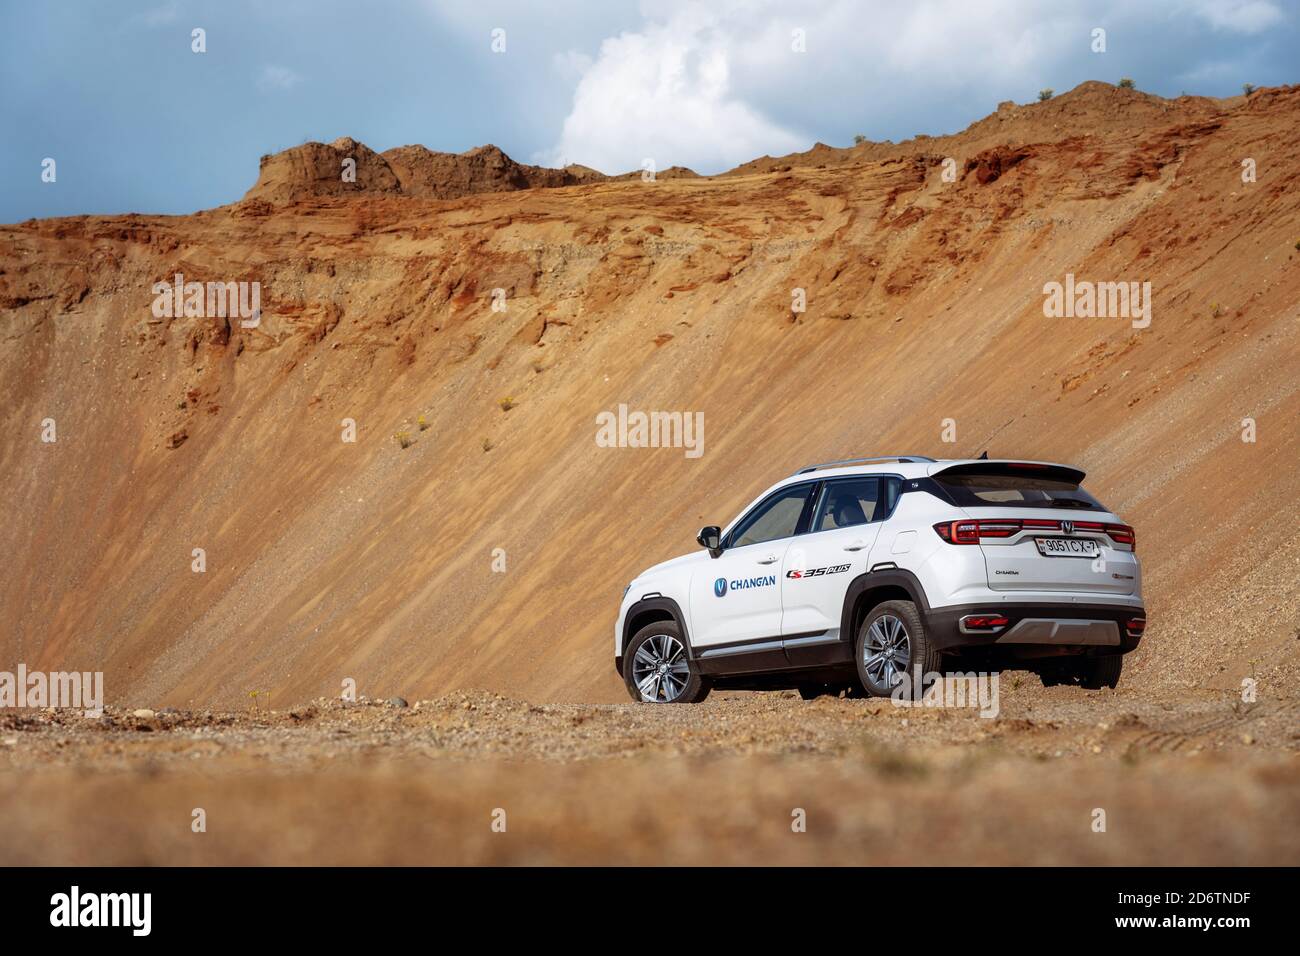 Kreva, Belarus - June 1, 2020: Changan cs35 Plus on country road in desert with mountains in background Stock Photo